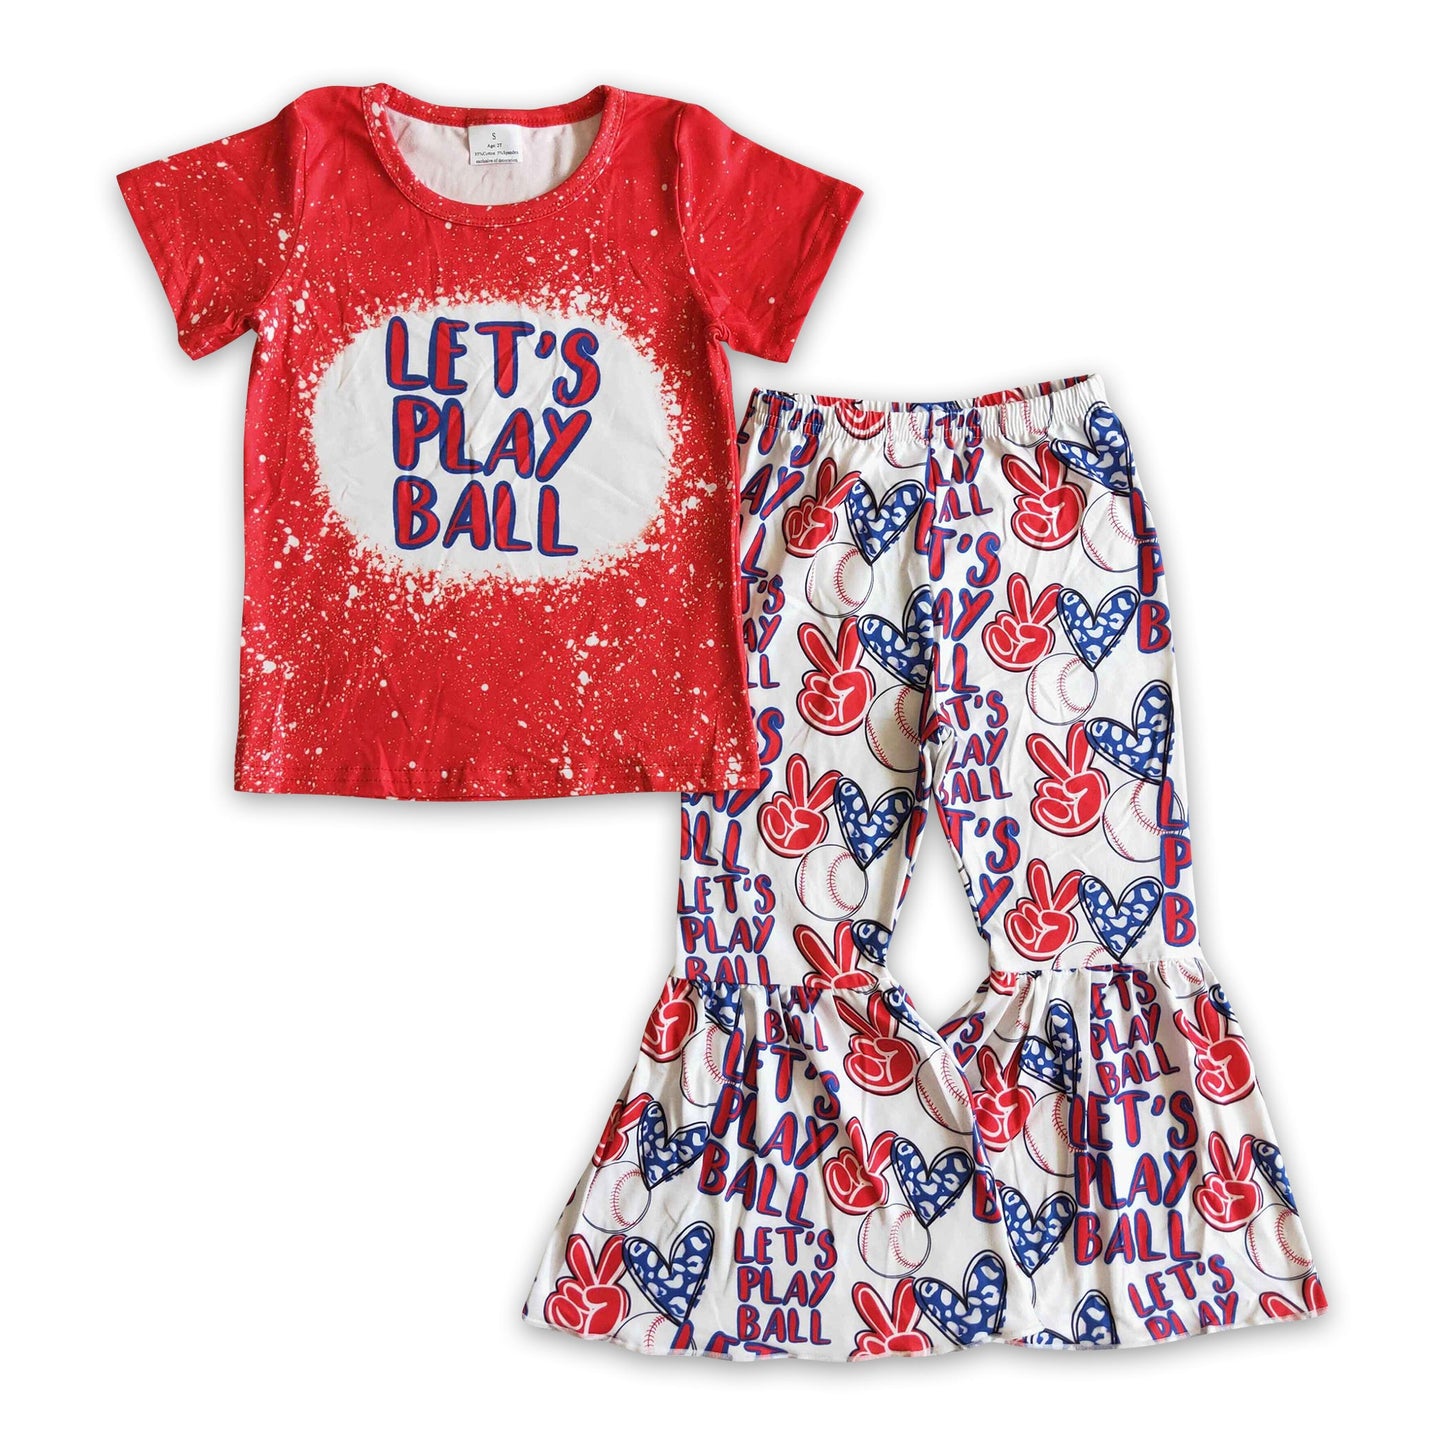 Let's play ball girls boutique game clothing